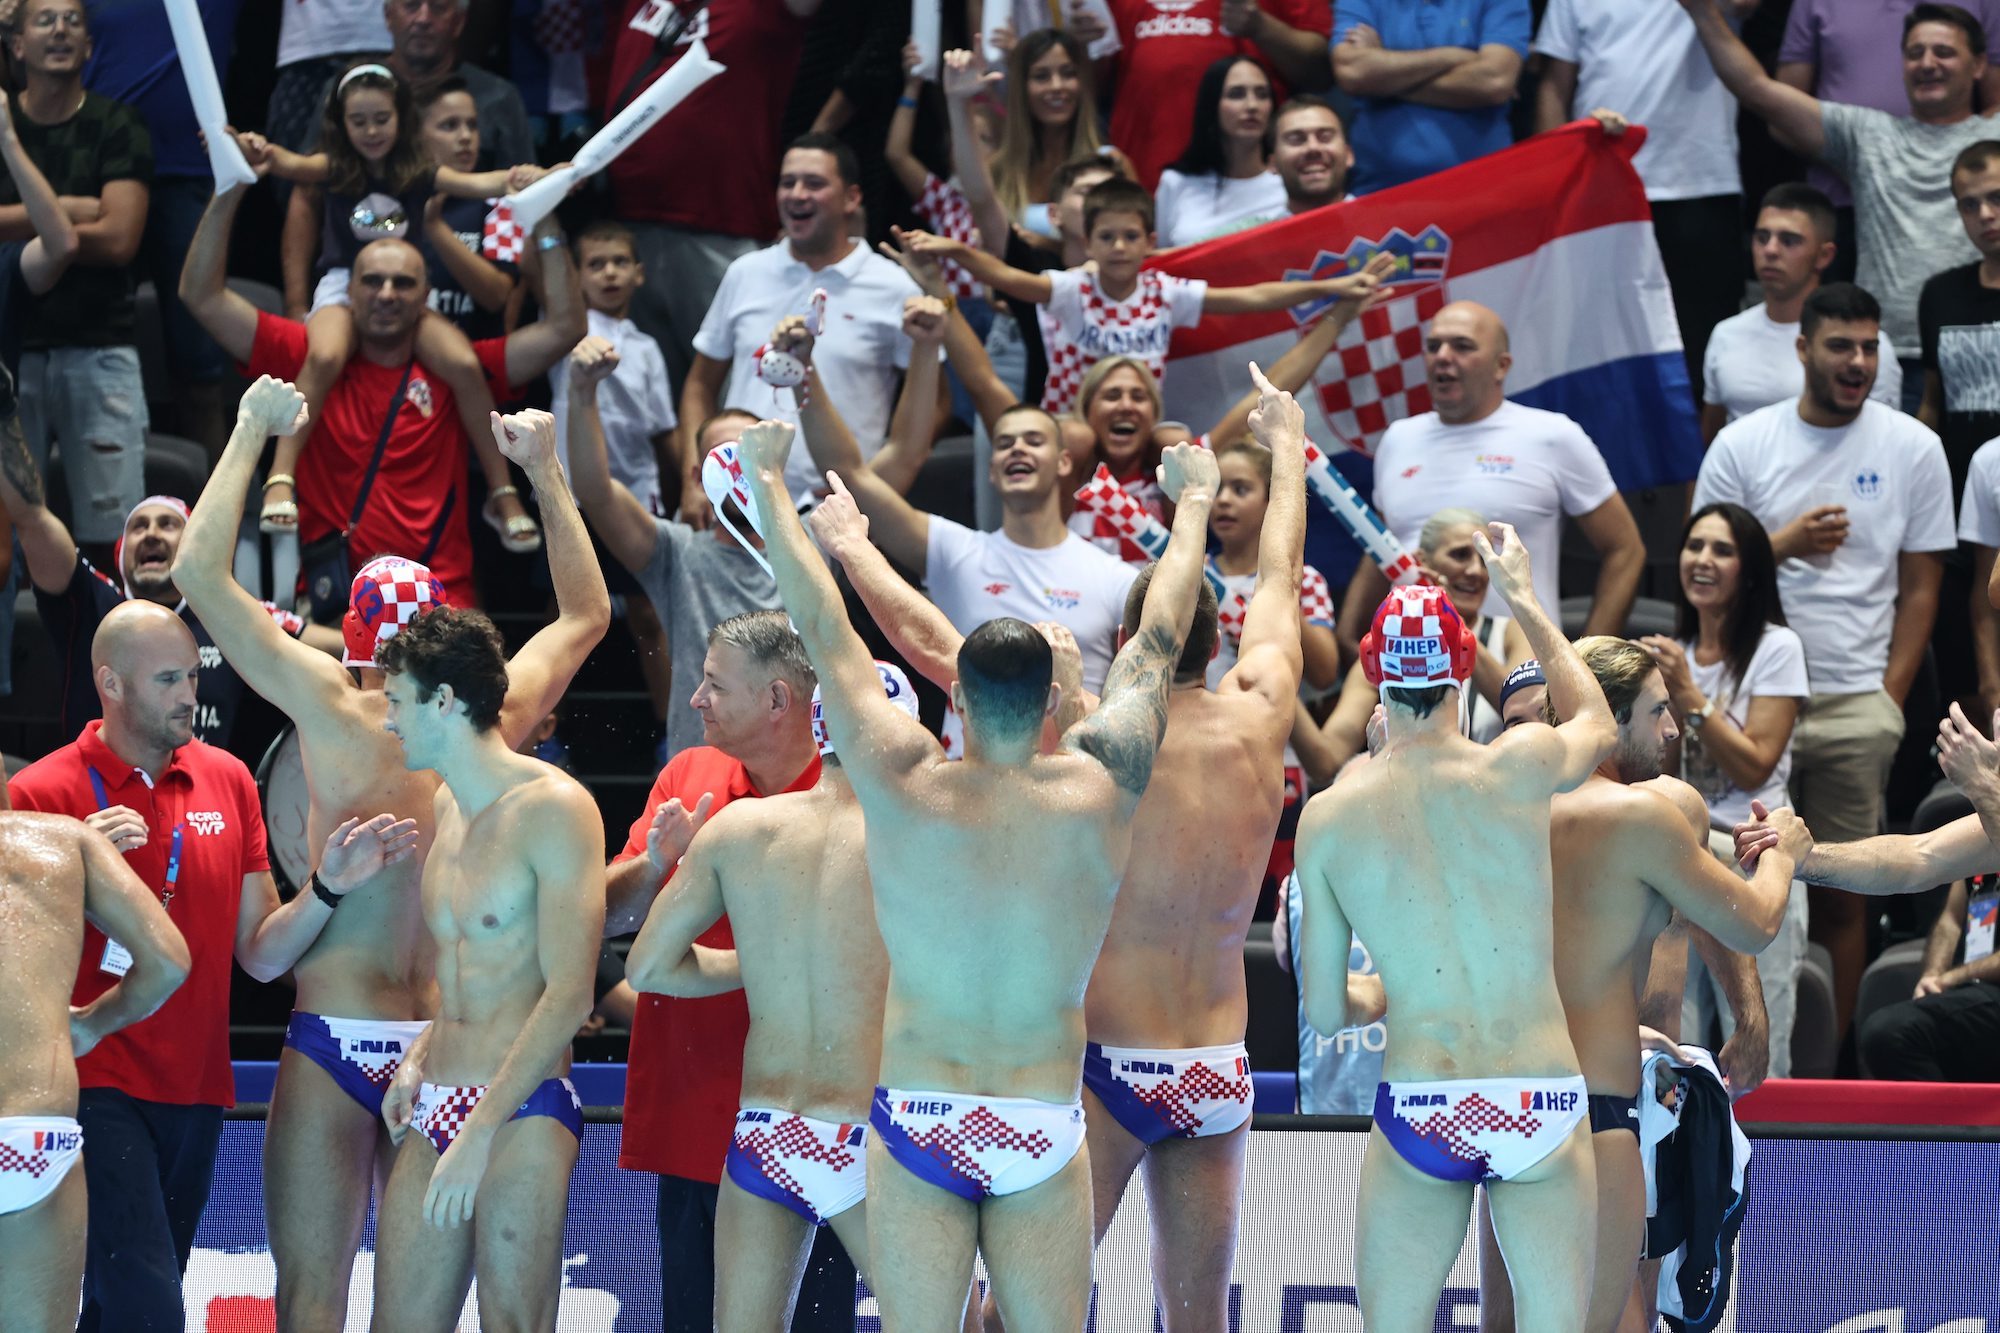 Amazing atmosphere in Split as Croatia set to play for water polo gold 